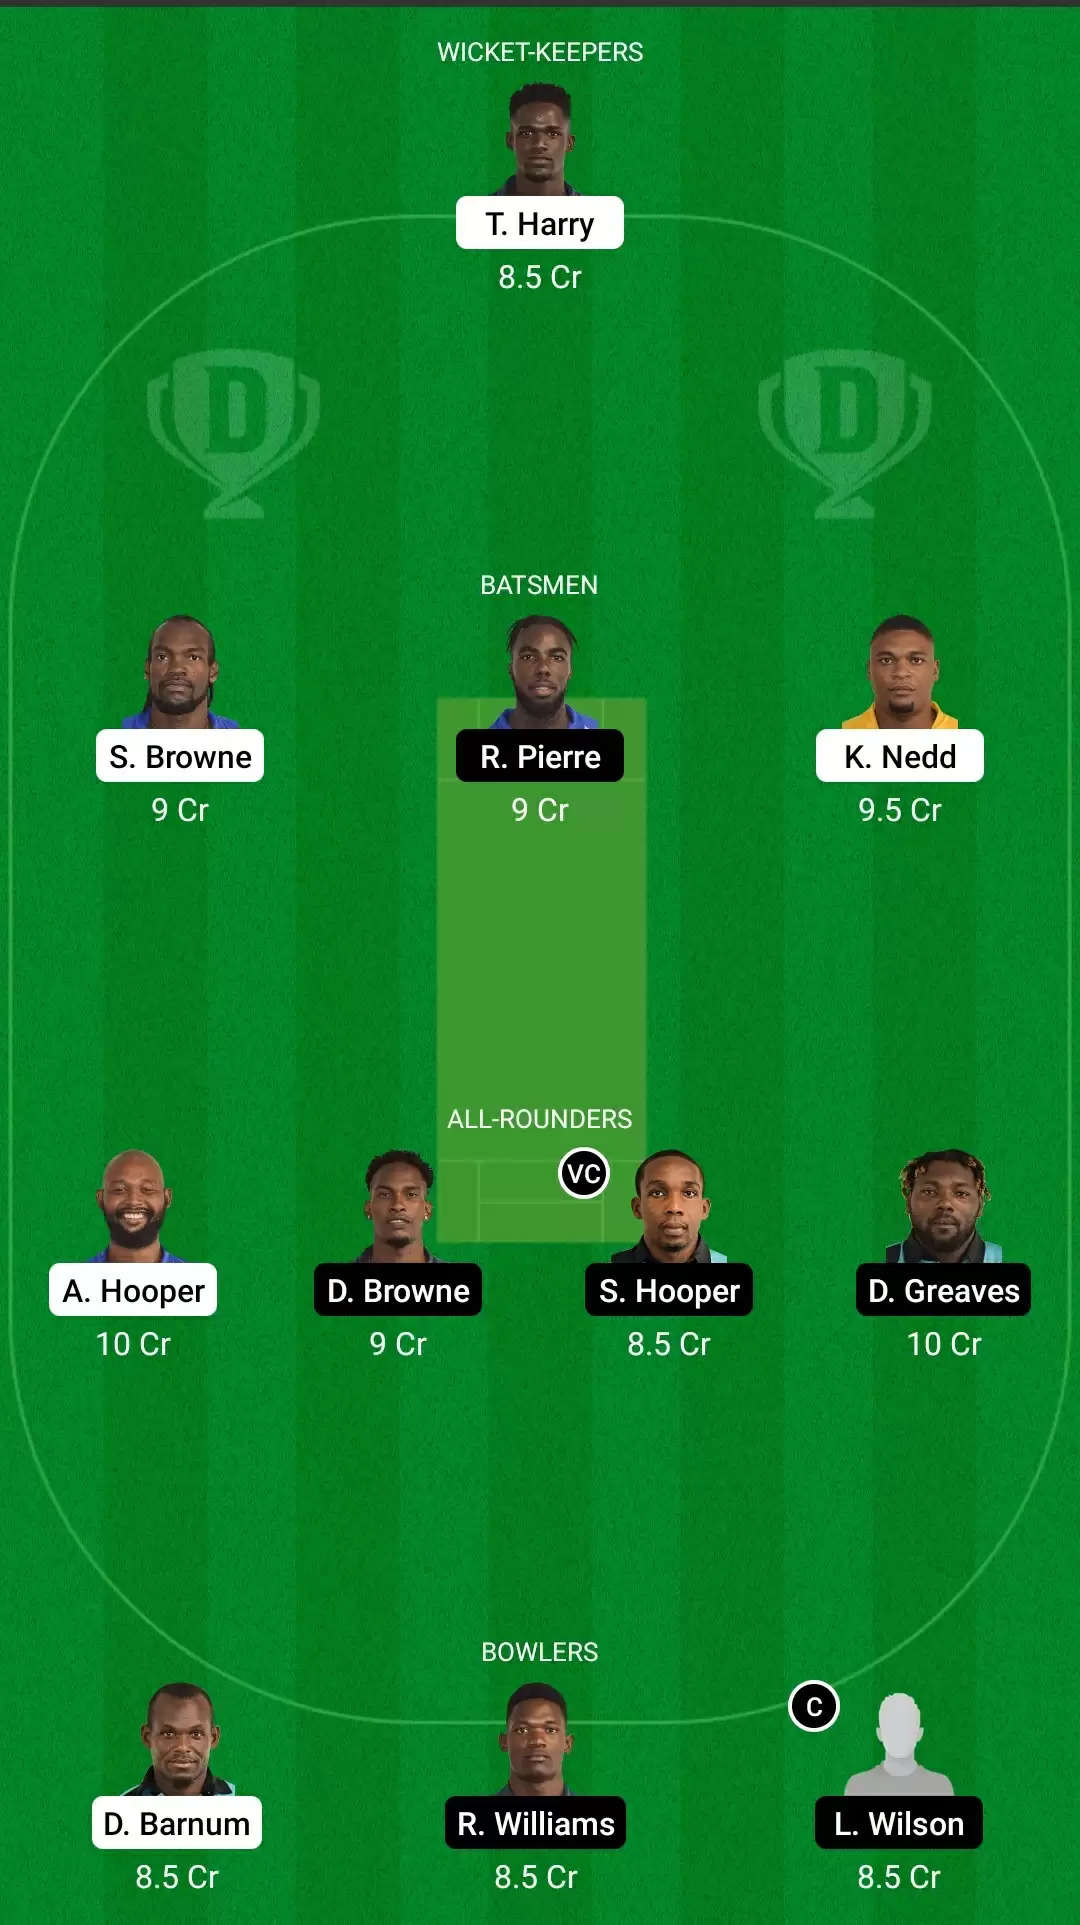 Vincy Premier League 2021, Match 11: GRD vs DVE Dream11 Prediction, Fantasy Cricket Tips, Team, Playing 11, Pitch Report, Weather Conditions and Injury Update